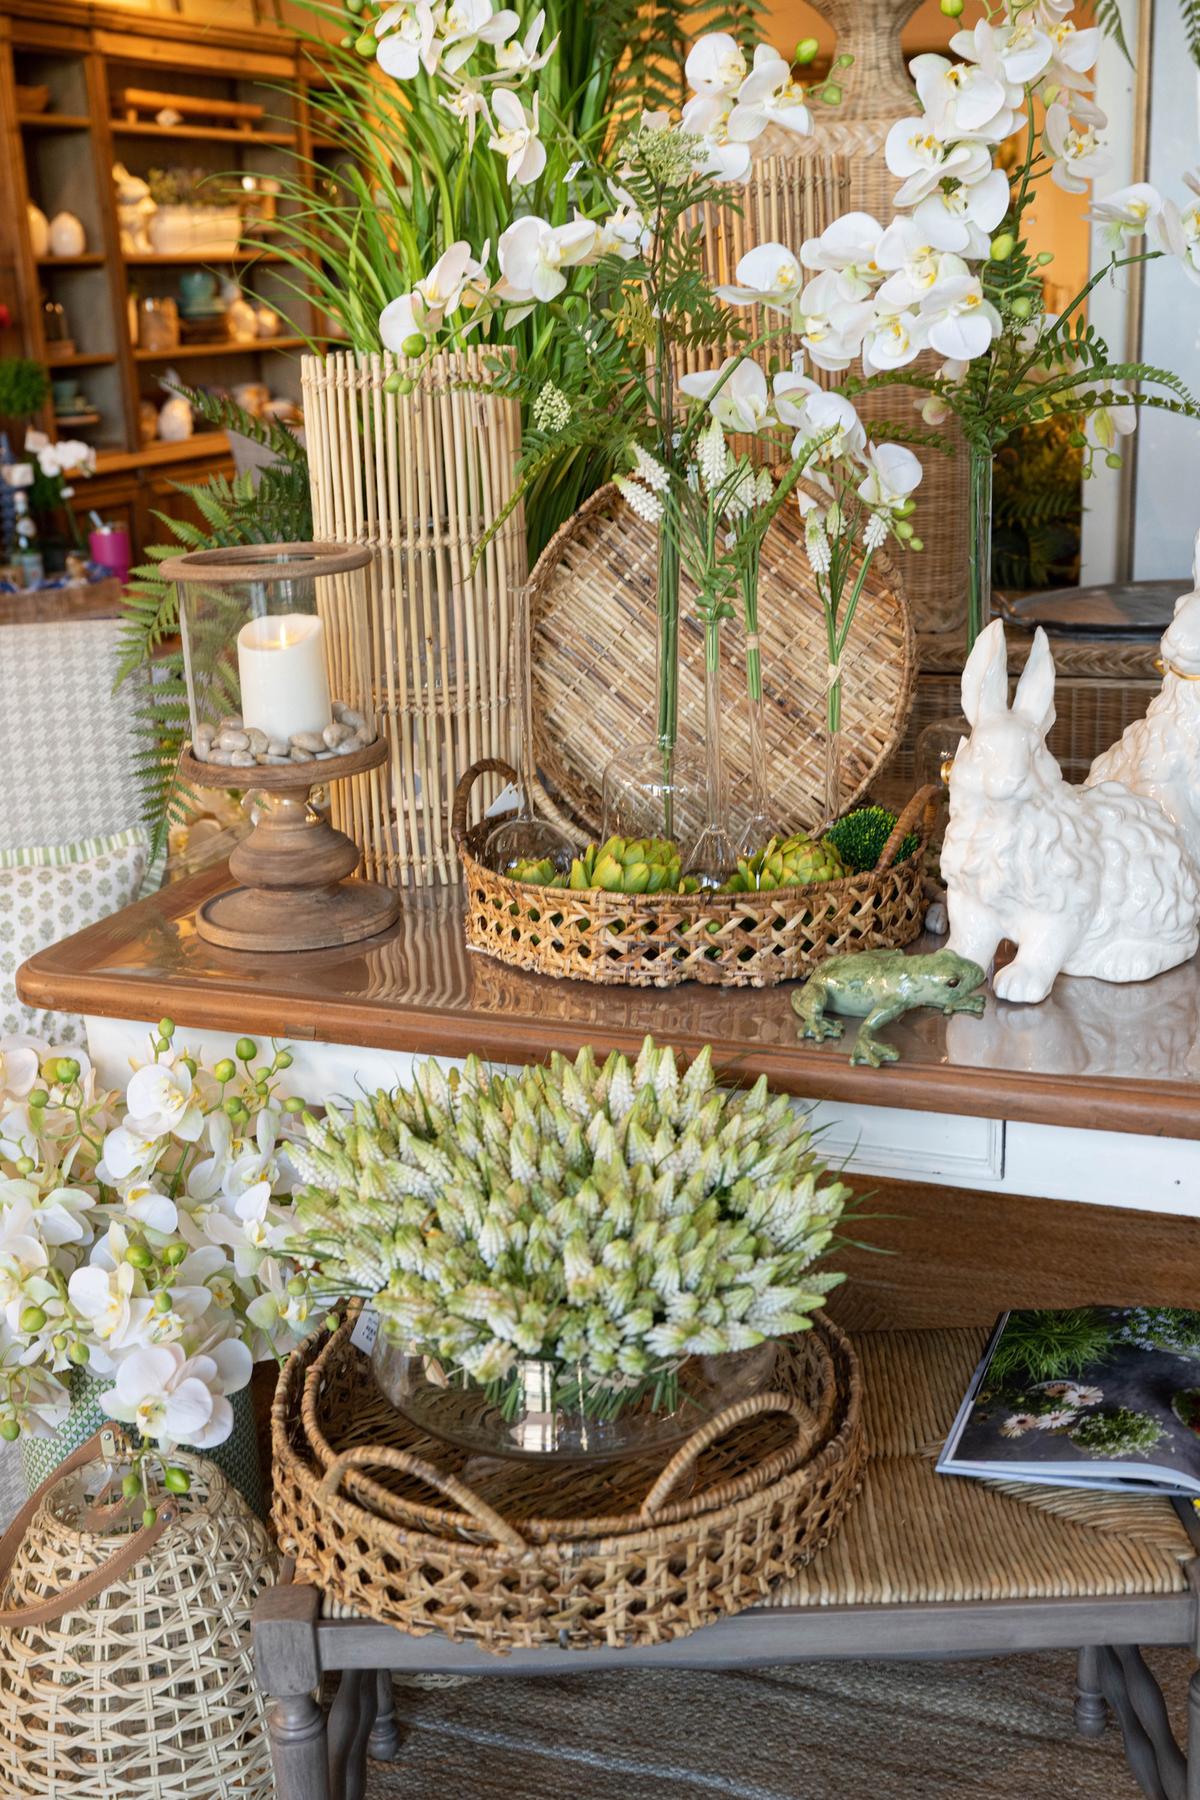 Once you find a bunny (or two) you love, itâ€™s time to display it! If you are looking to create a sweet Easter or spring vignette with your bunny as the shining star, start by placing a large bunny in the center and add smaller items around it, such as candles, vases of flowers or even decorative eggs. (Handout/TNS)